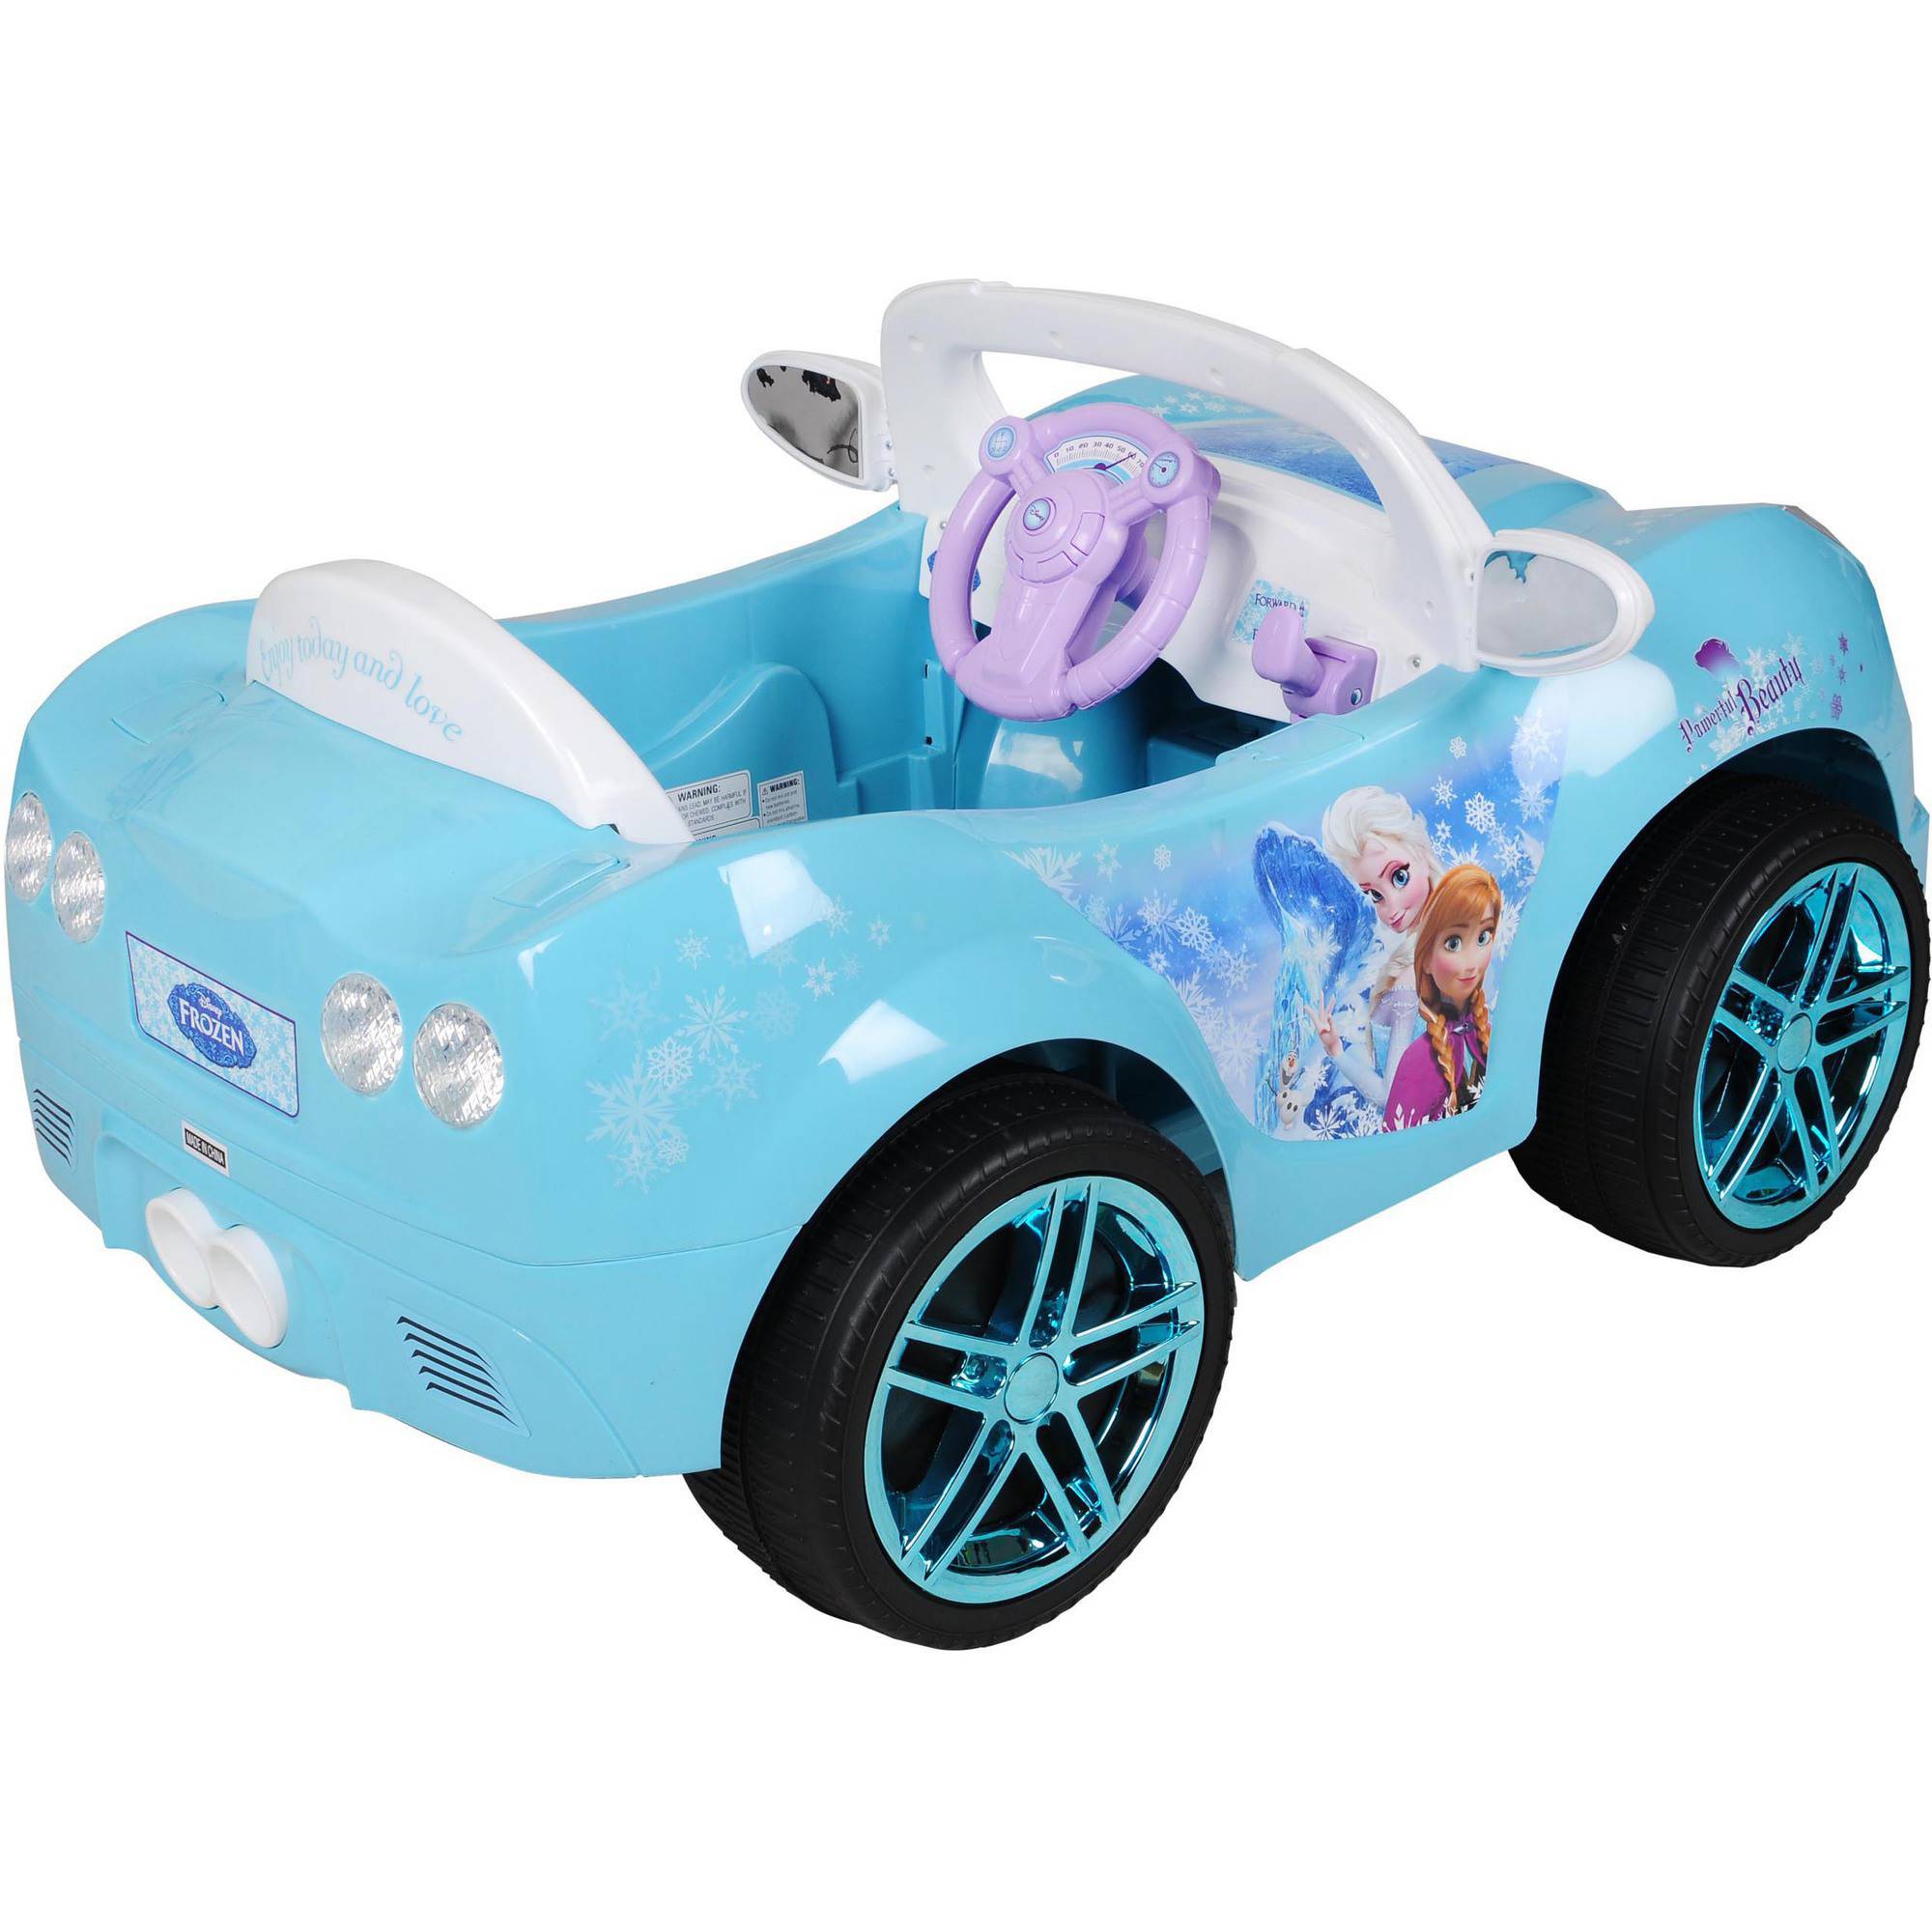 Disney Frozen Convertible Car 6-Volt Battery-Powered Ride-On - image 3 of 7